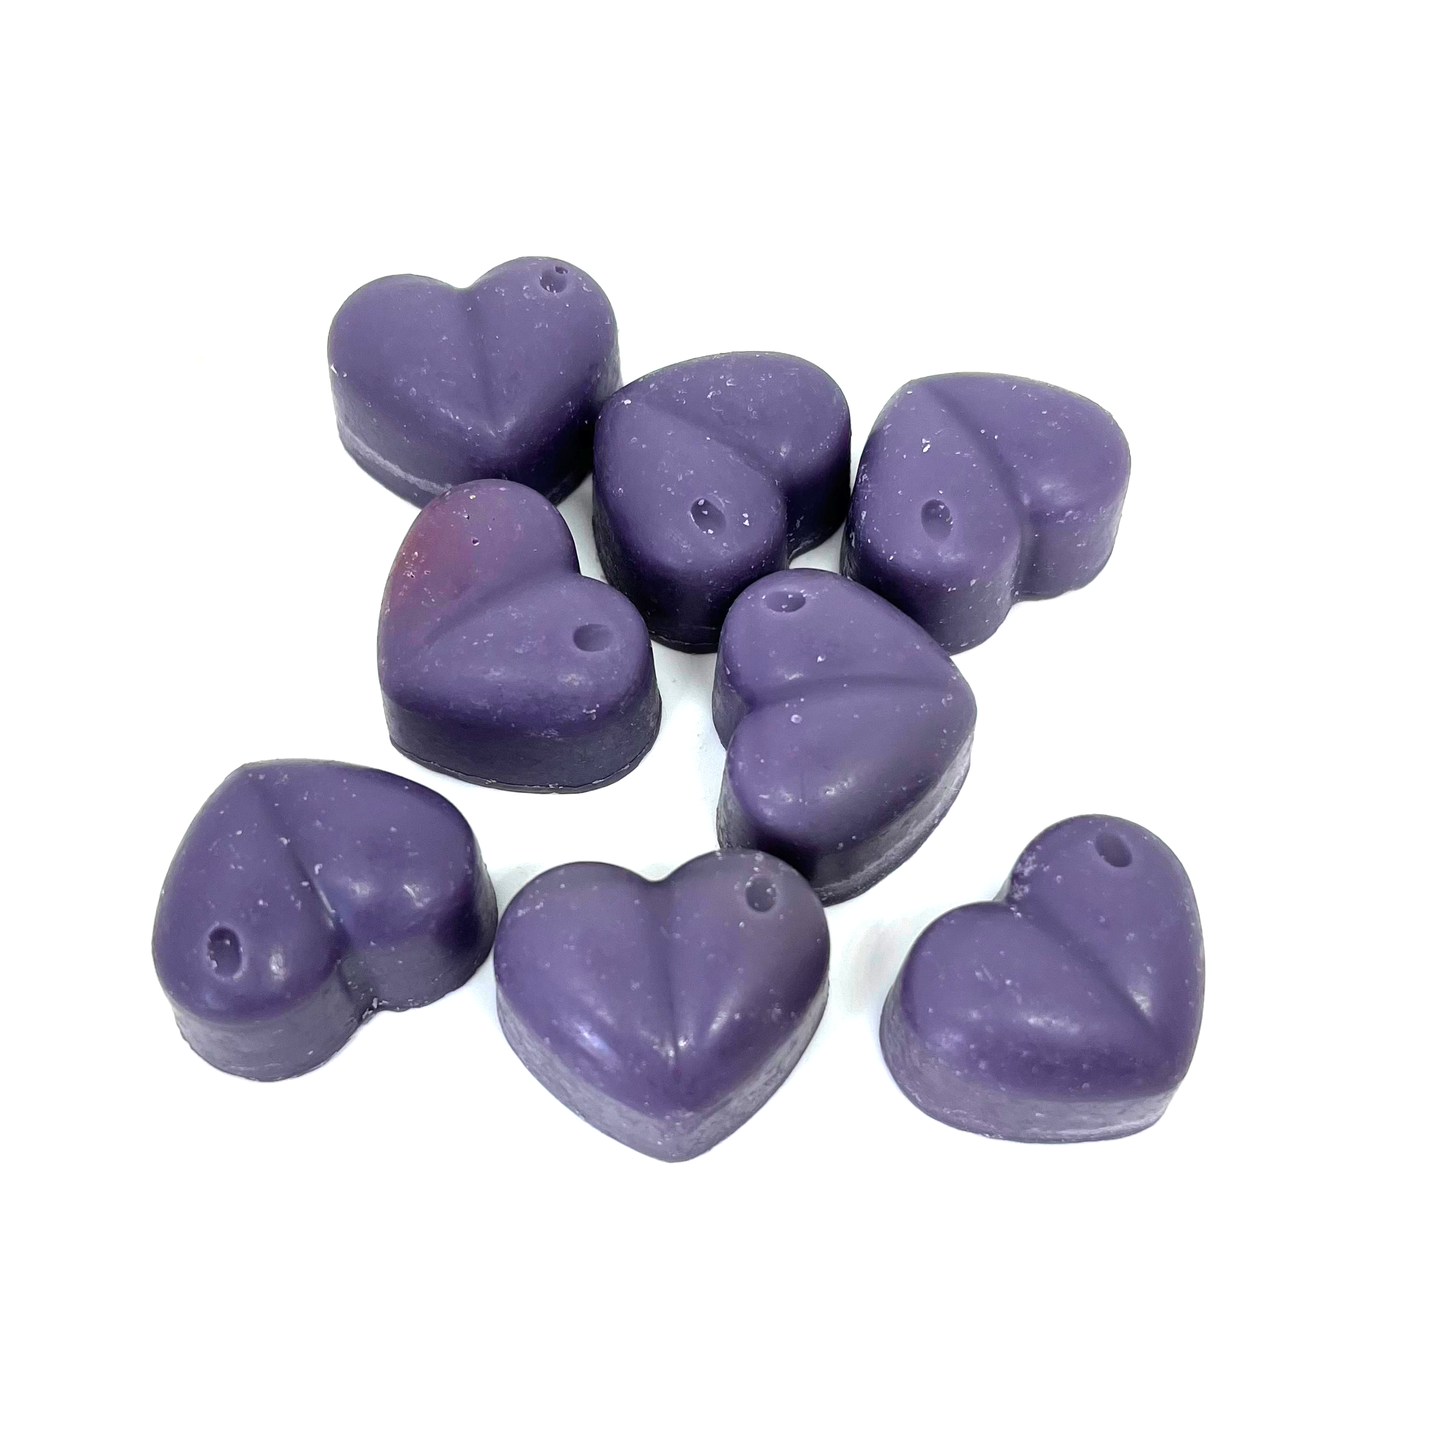 Velvet Orchid Wax Melts Inspired by TF - ScentiMelti  Velvet Orchid Wax Melts Inspired by TF